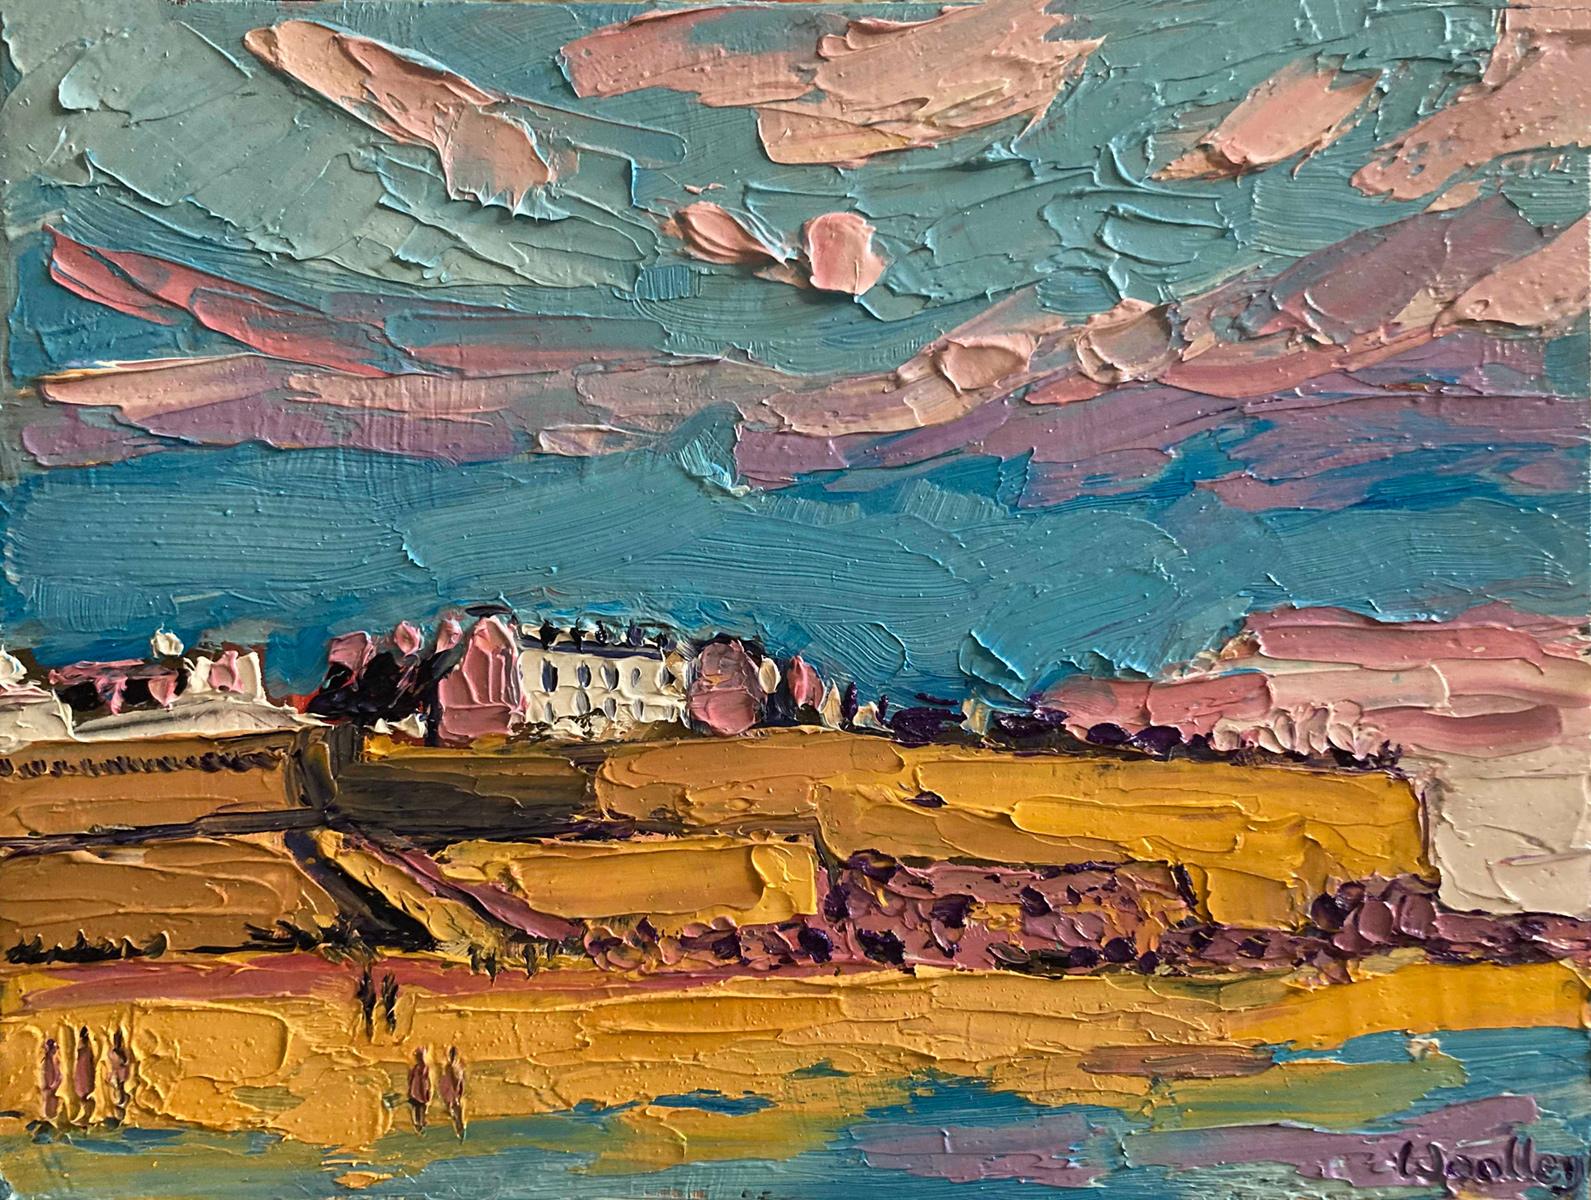 Saint Malo Sky, Textured Original Oil Painting, Colourful French Landscape 